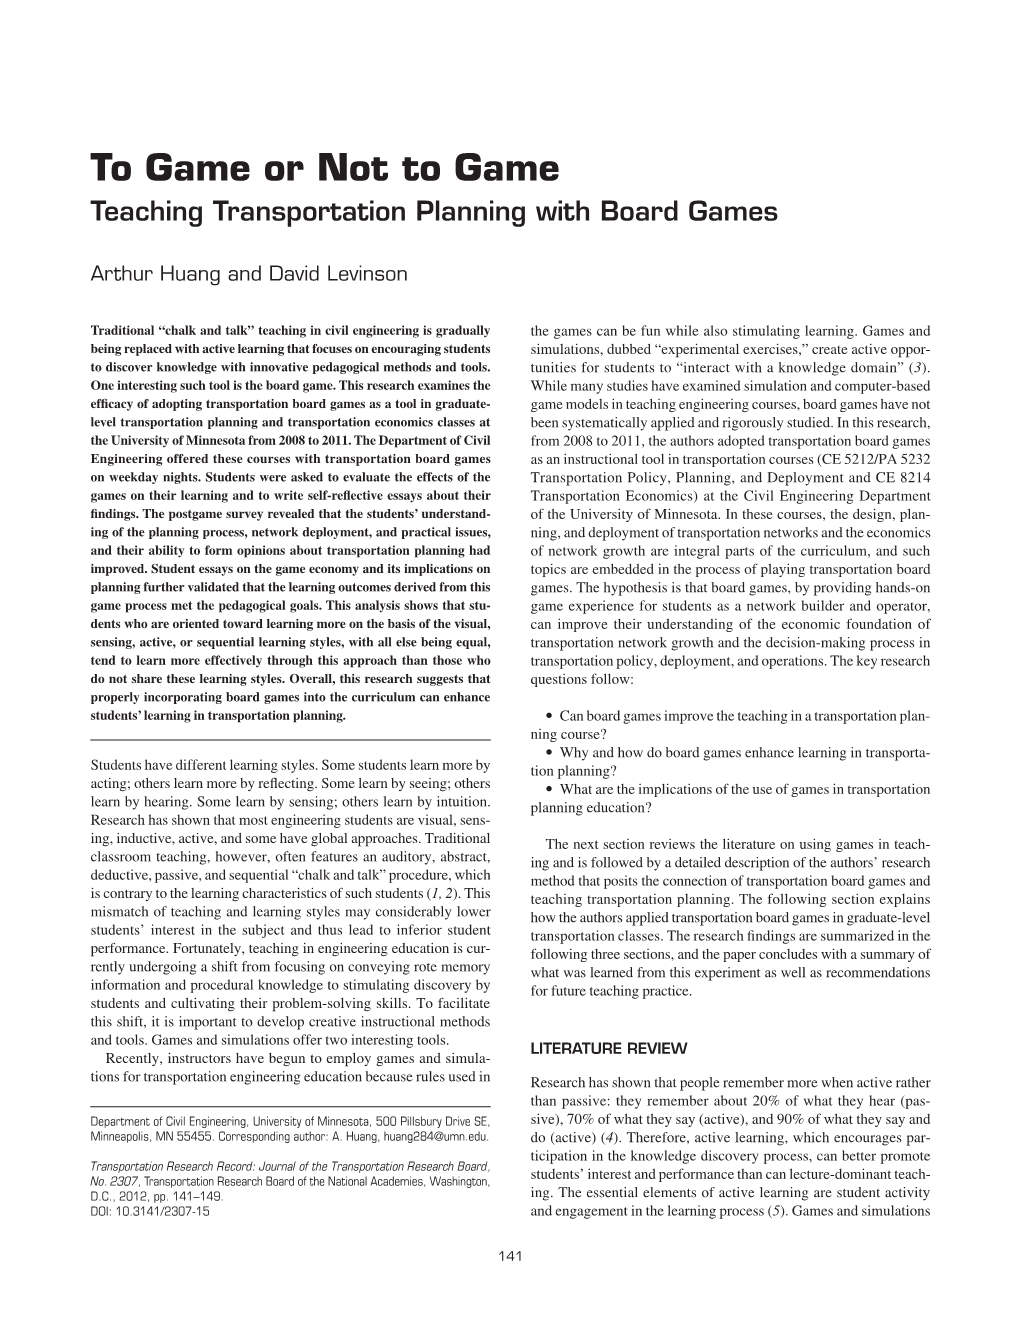 To Game Or Not to Game Teaching Transportation Planning with Board Games